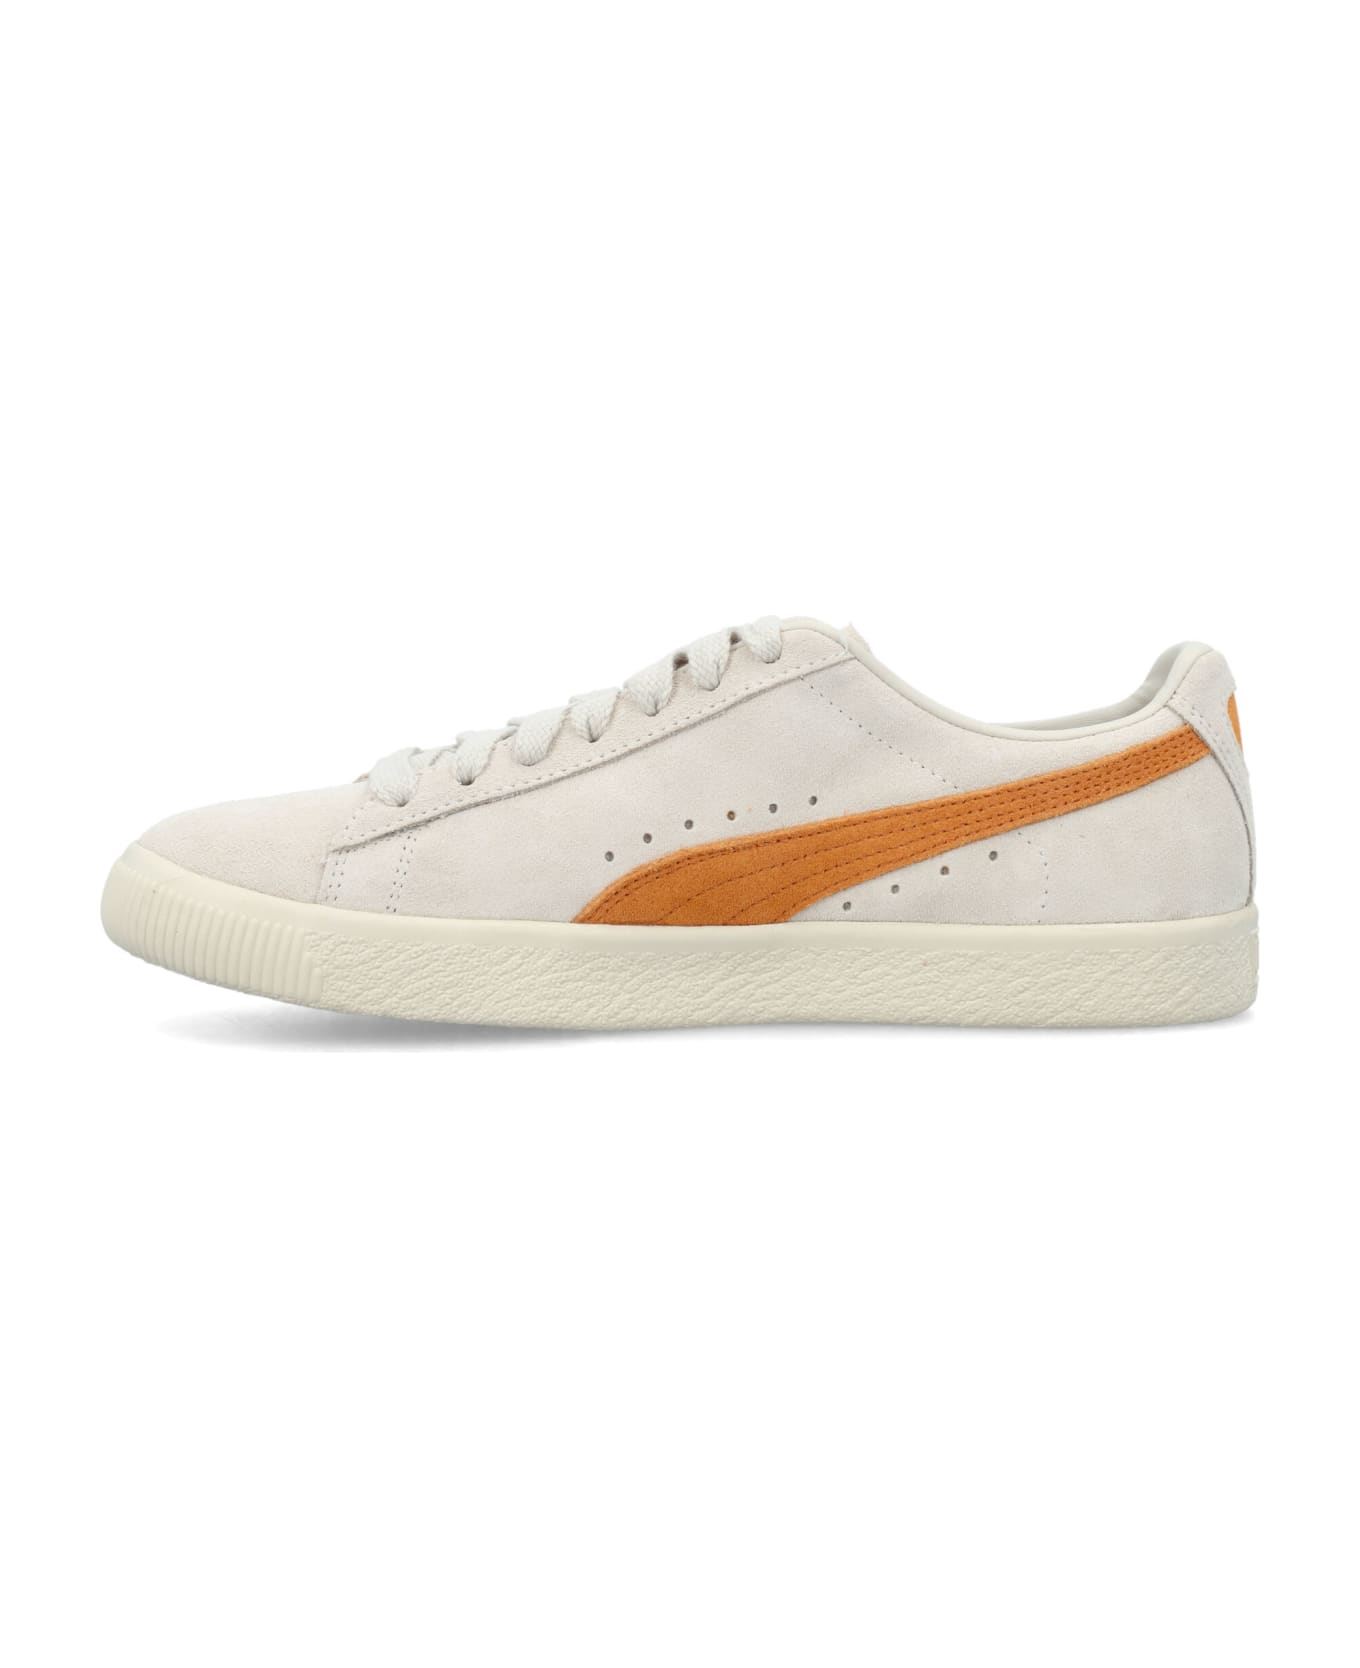 Puma Clyde Og Sneakers - FROSTED IVORY CLEMENTINE